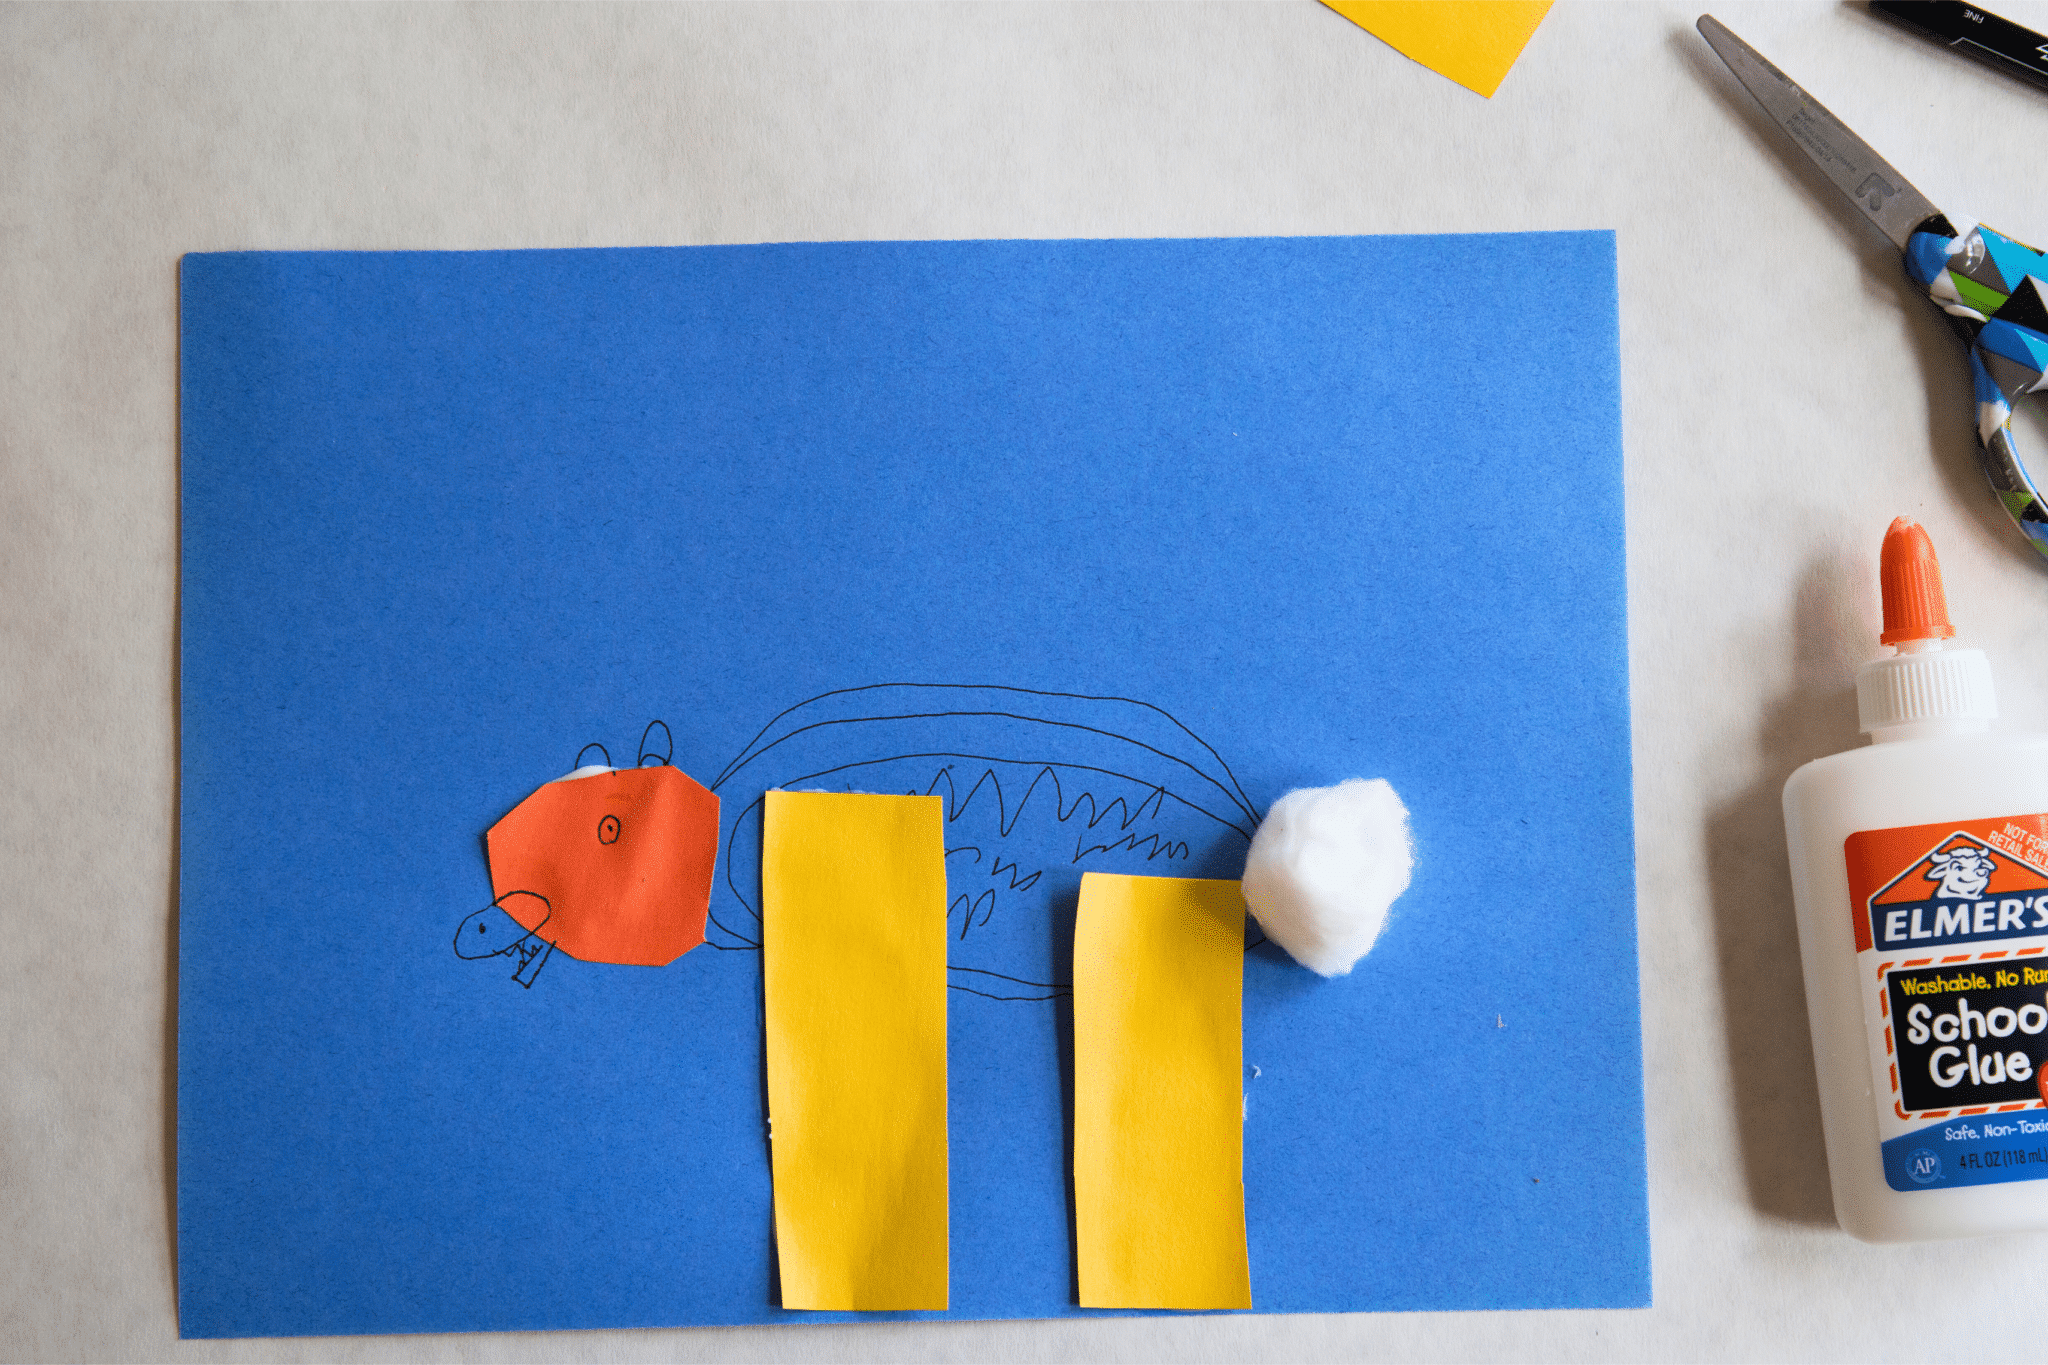 How to Make Paper Collage for Kids